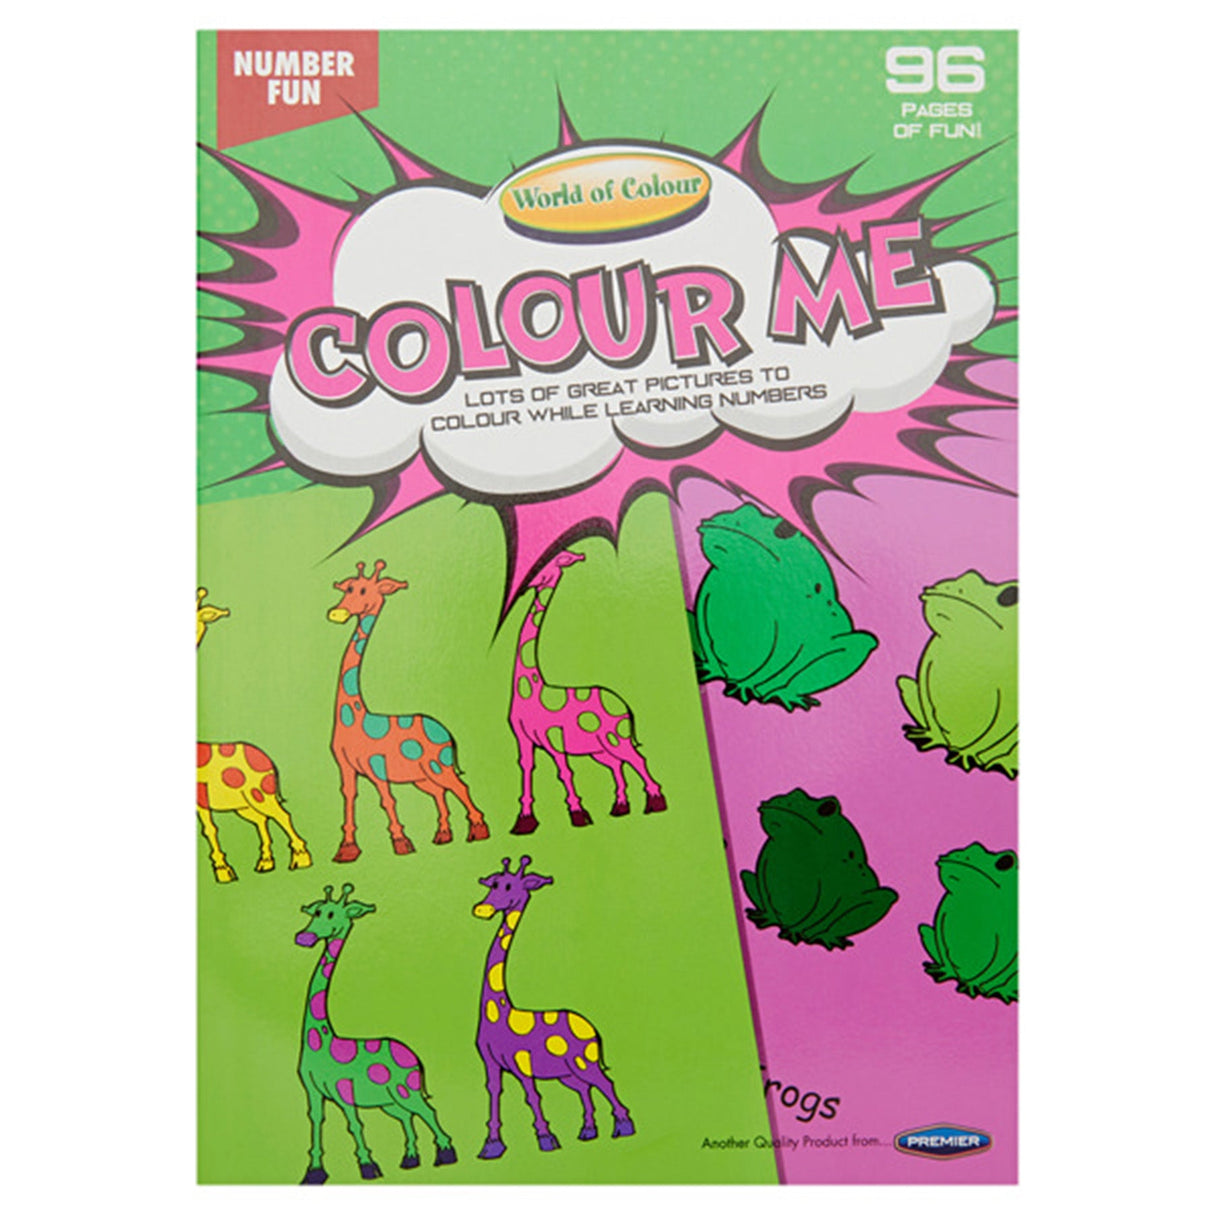 World of Colour A4 Perforated Colour Me Colouring Book - 96 Pages - Number Fun | Stationery Shop UK